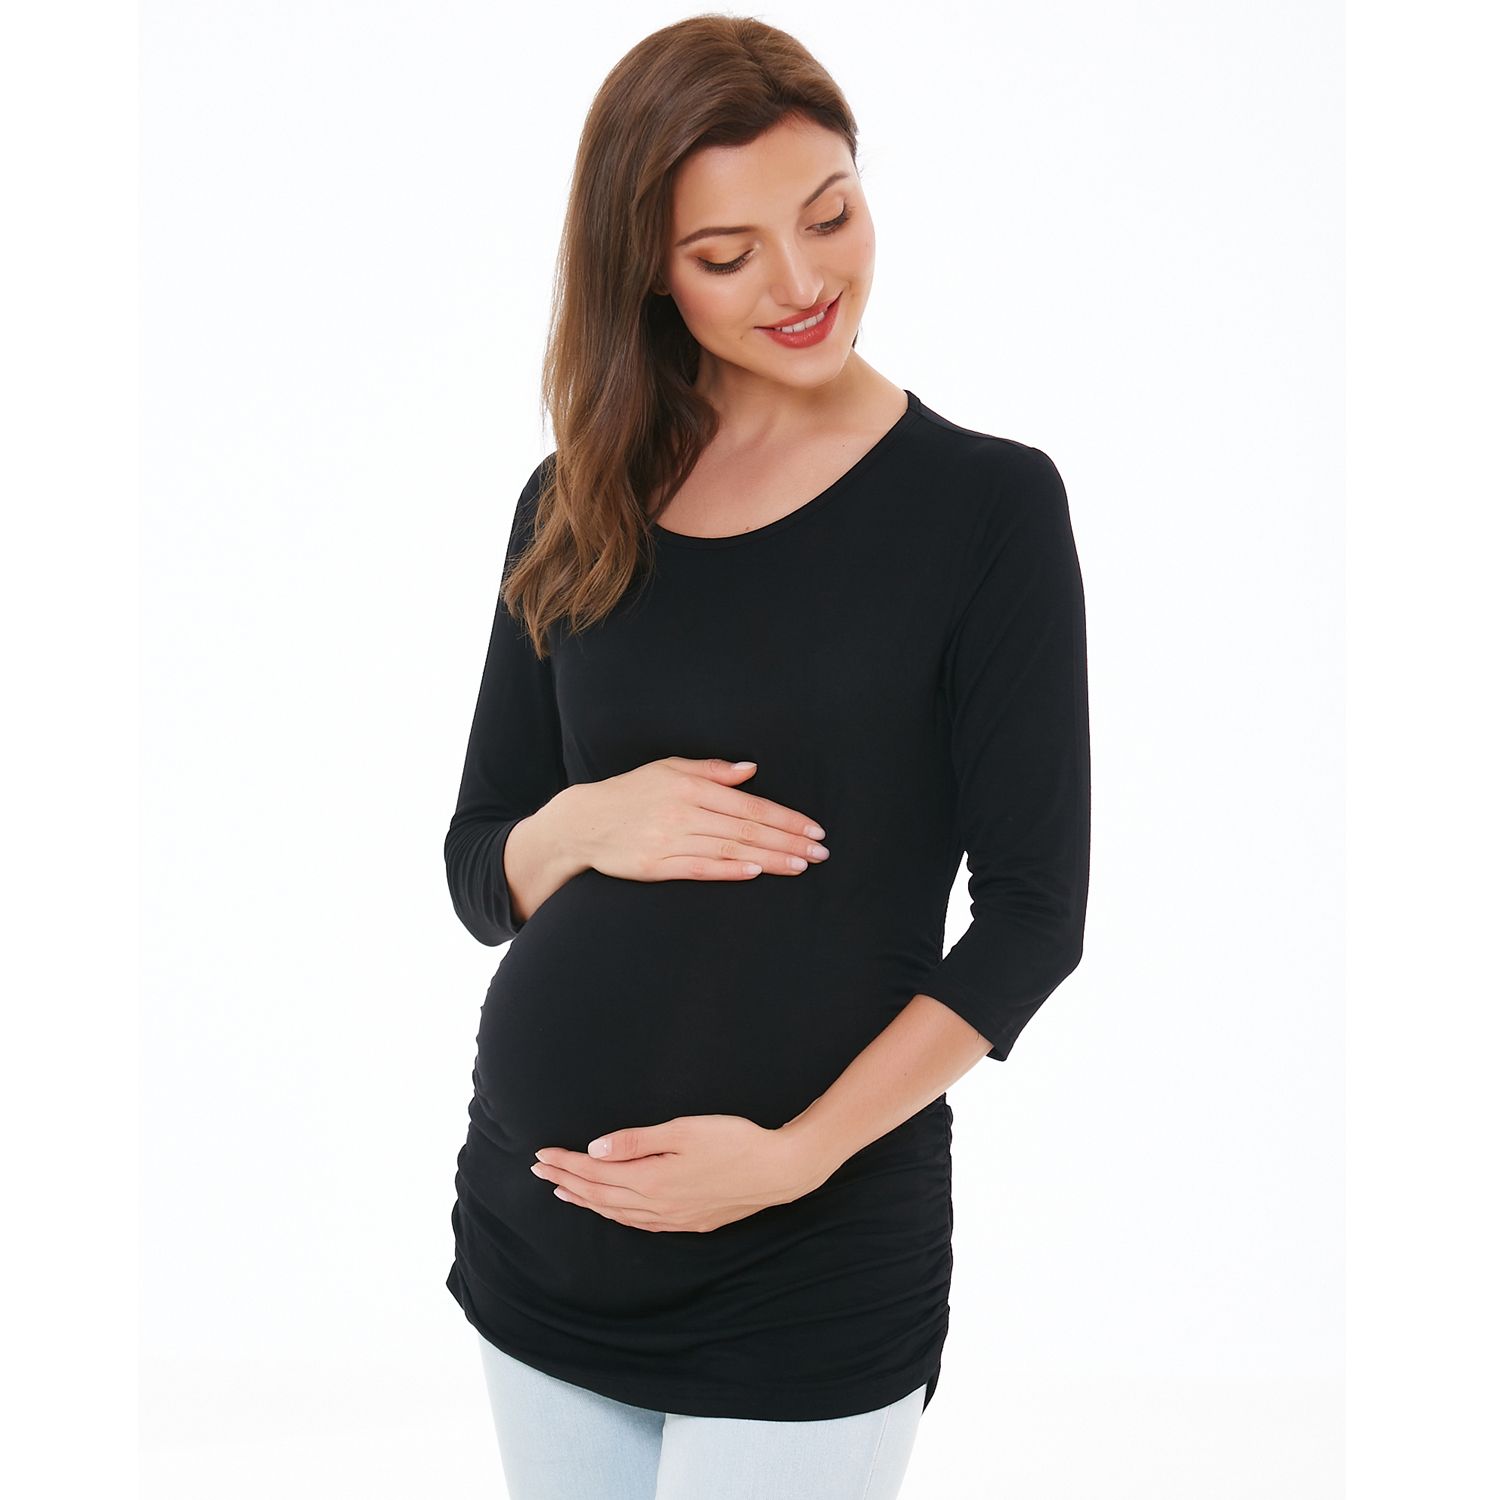 Smallshow Women's Maternity Shirts Long Sleeve Pregnancy Clothes Tops 3-Pack 